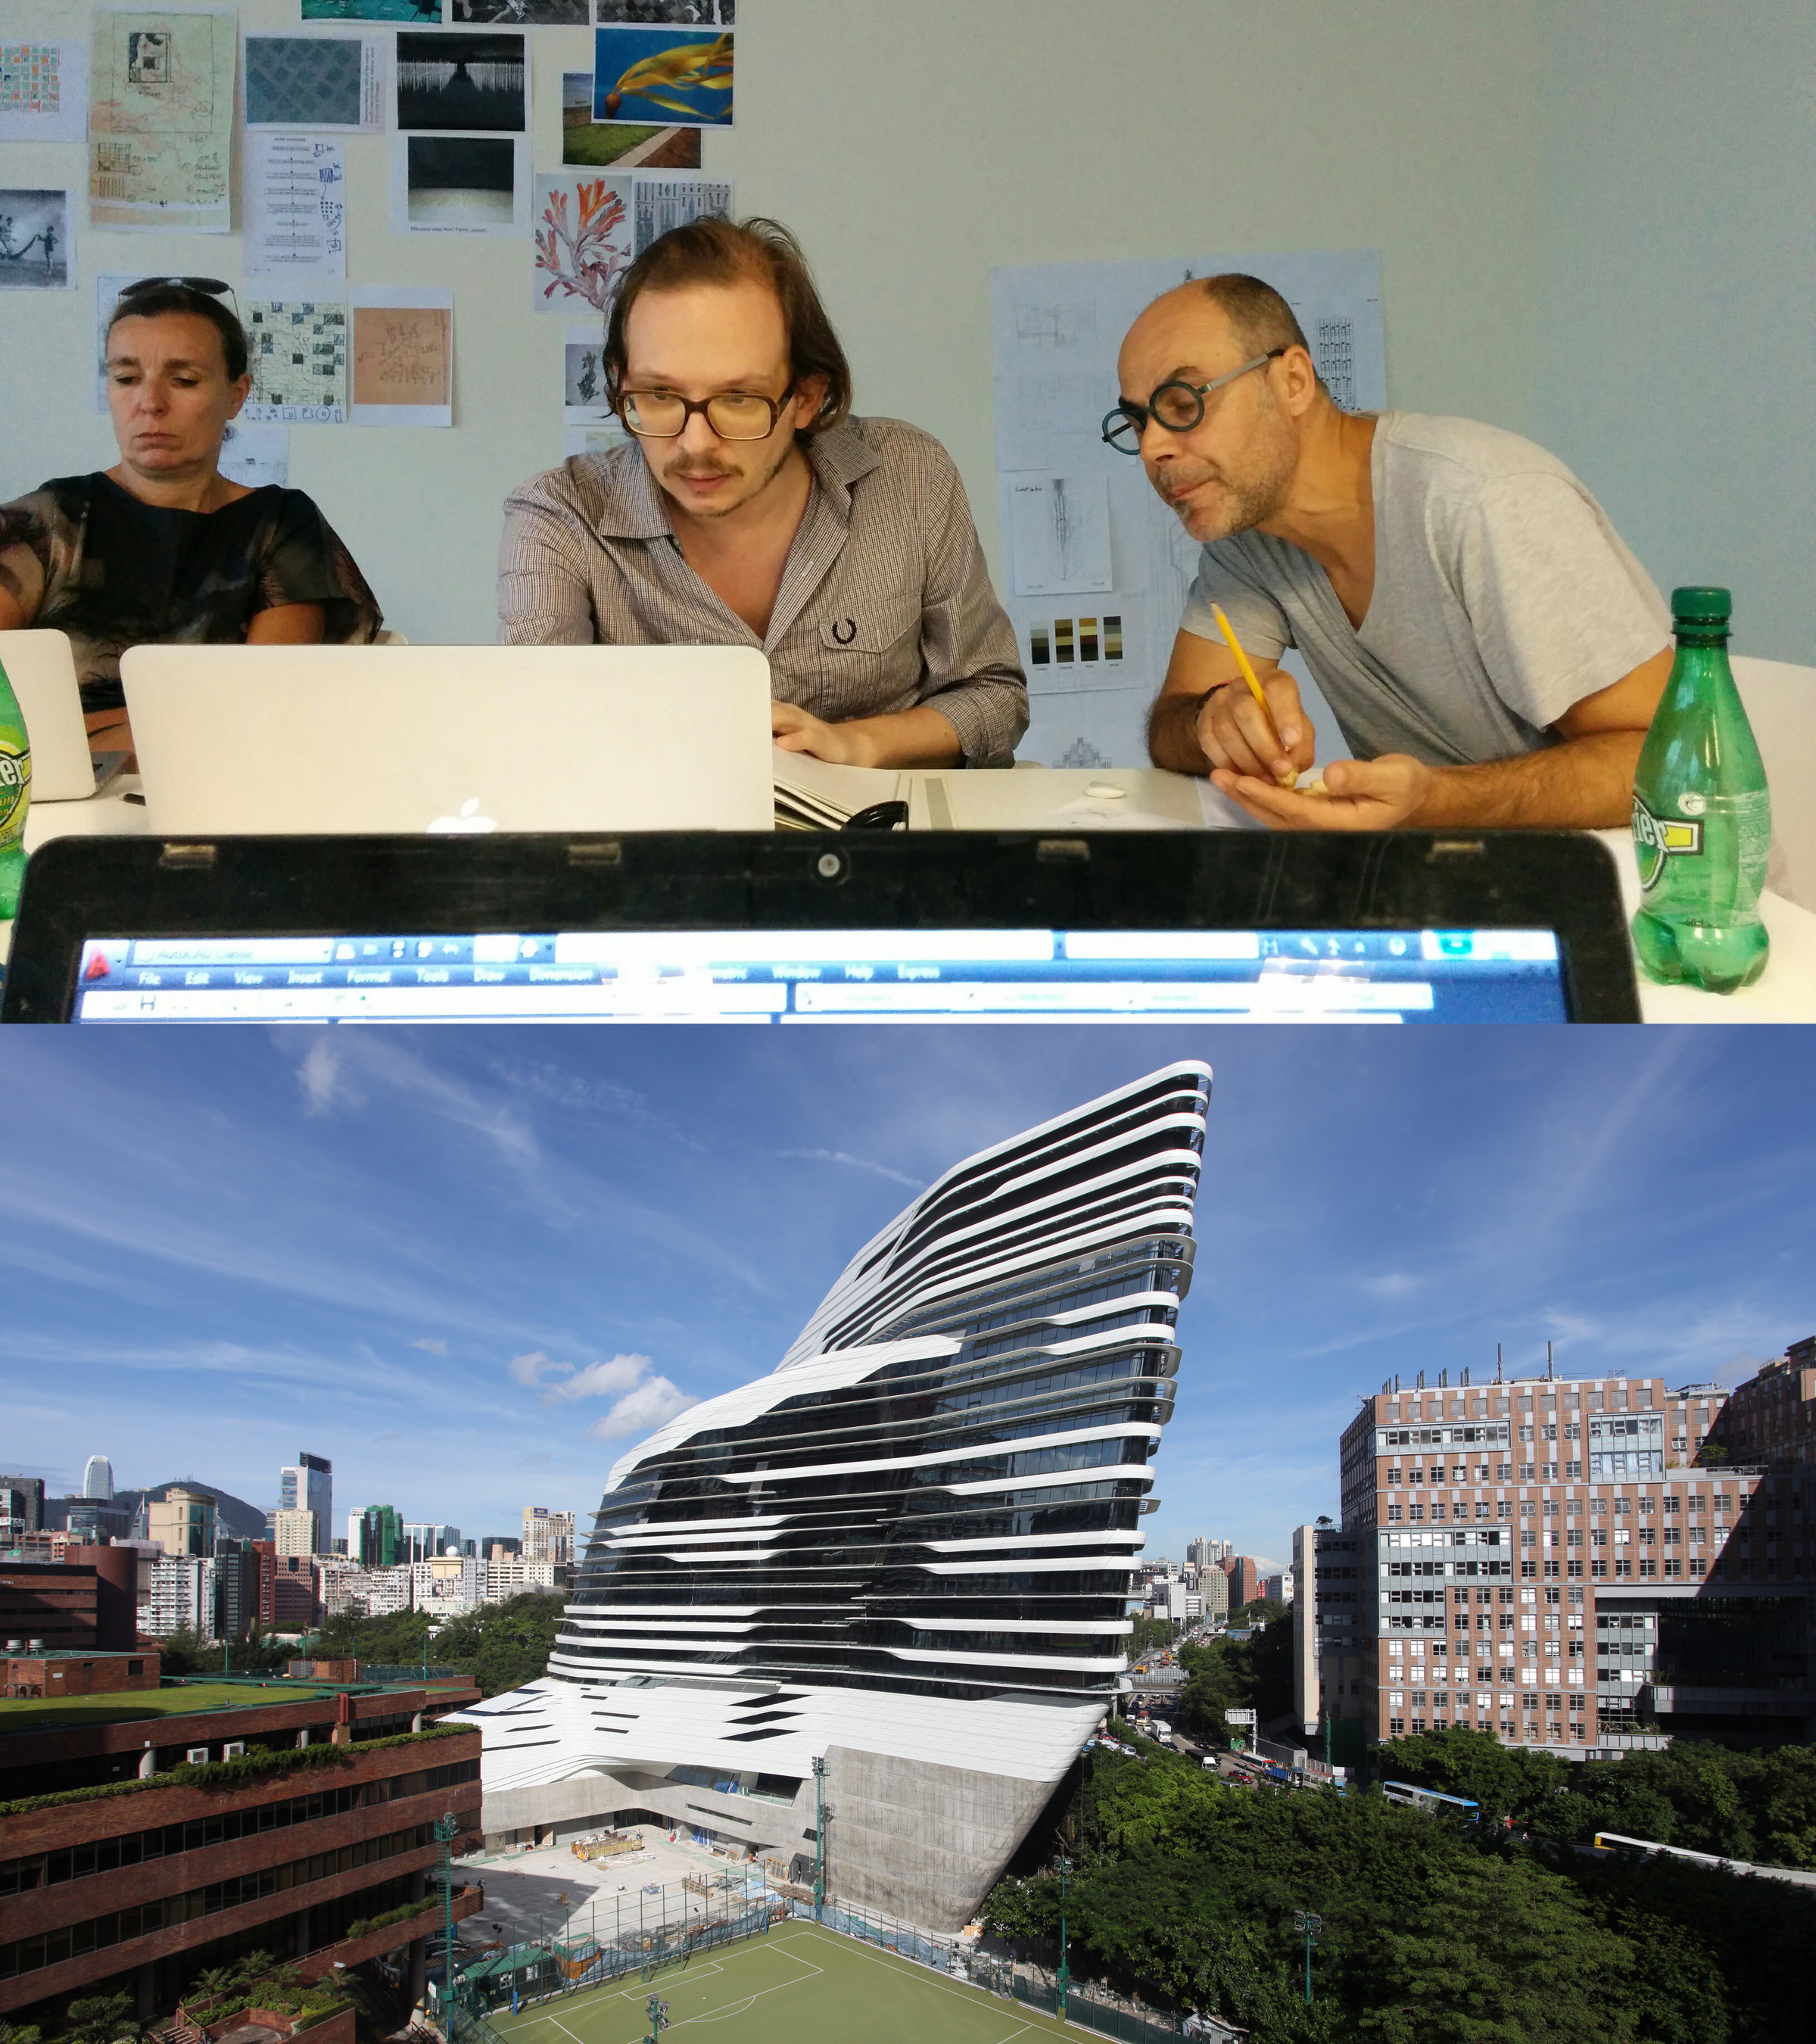 The research project led by Laurent Gutierrez, Valérie Portefaix and Project Supervisor (Cartography) Gilles Vanderstocken (middle) was conducted in the Jockey Club Innovation Tower, home of Hong Kong PolyU School of Design.